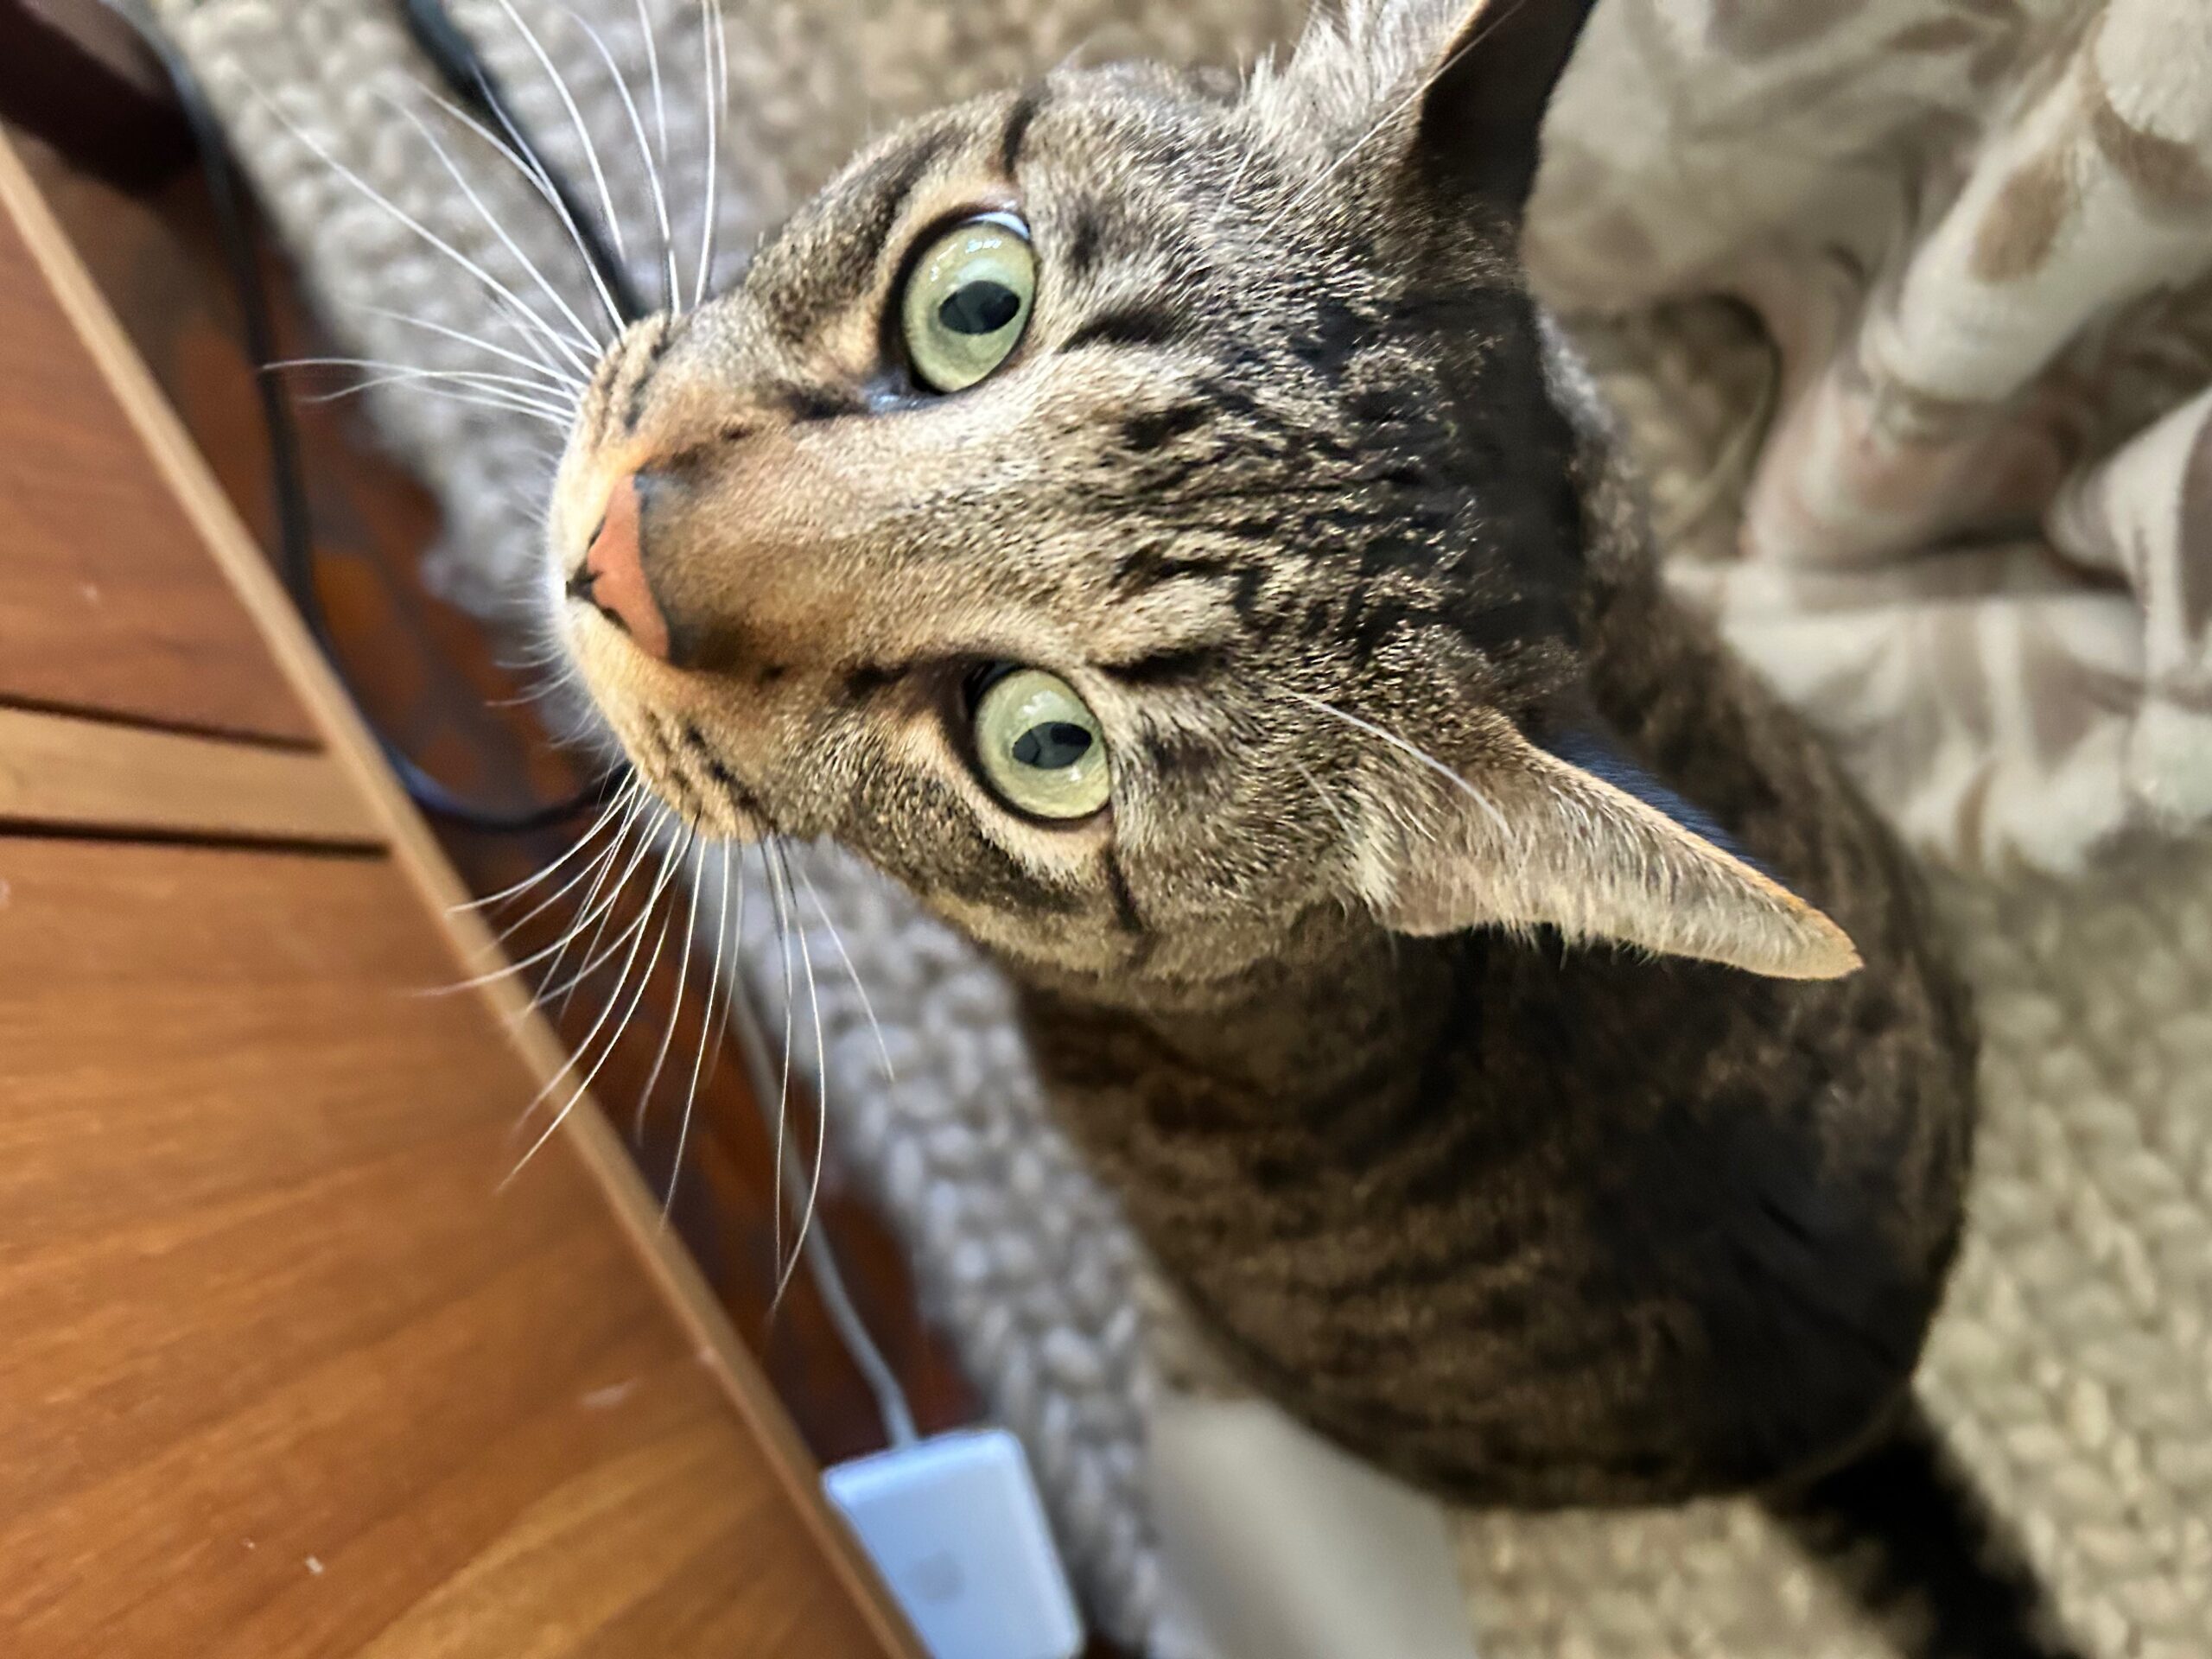 A brown tabby cat looking up at the camera. He's on a white rug next to a wooden cabinet.